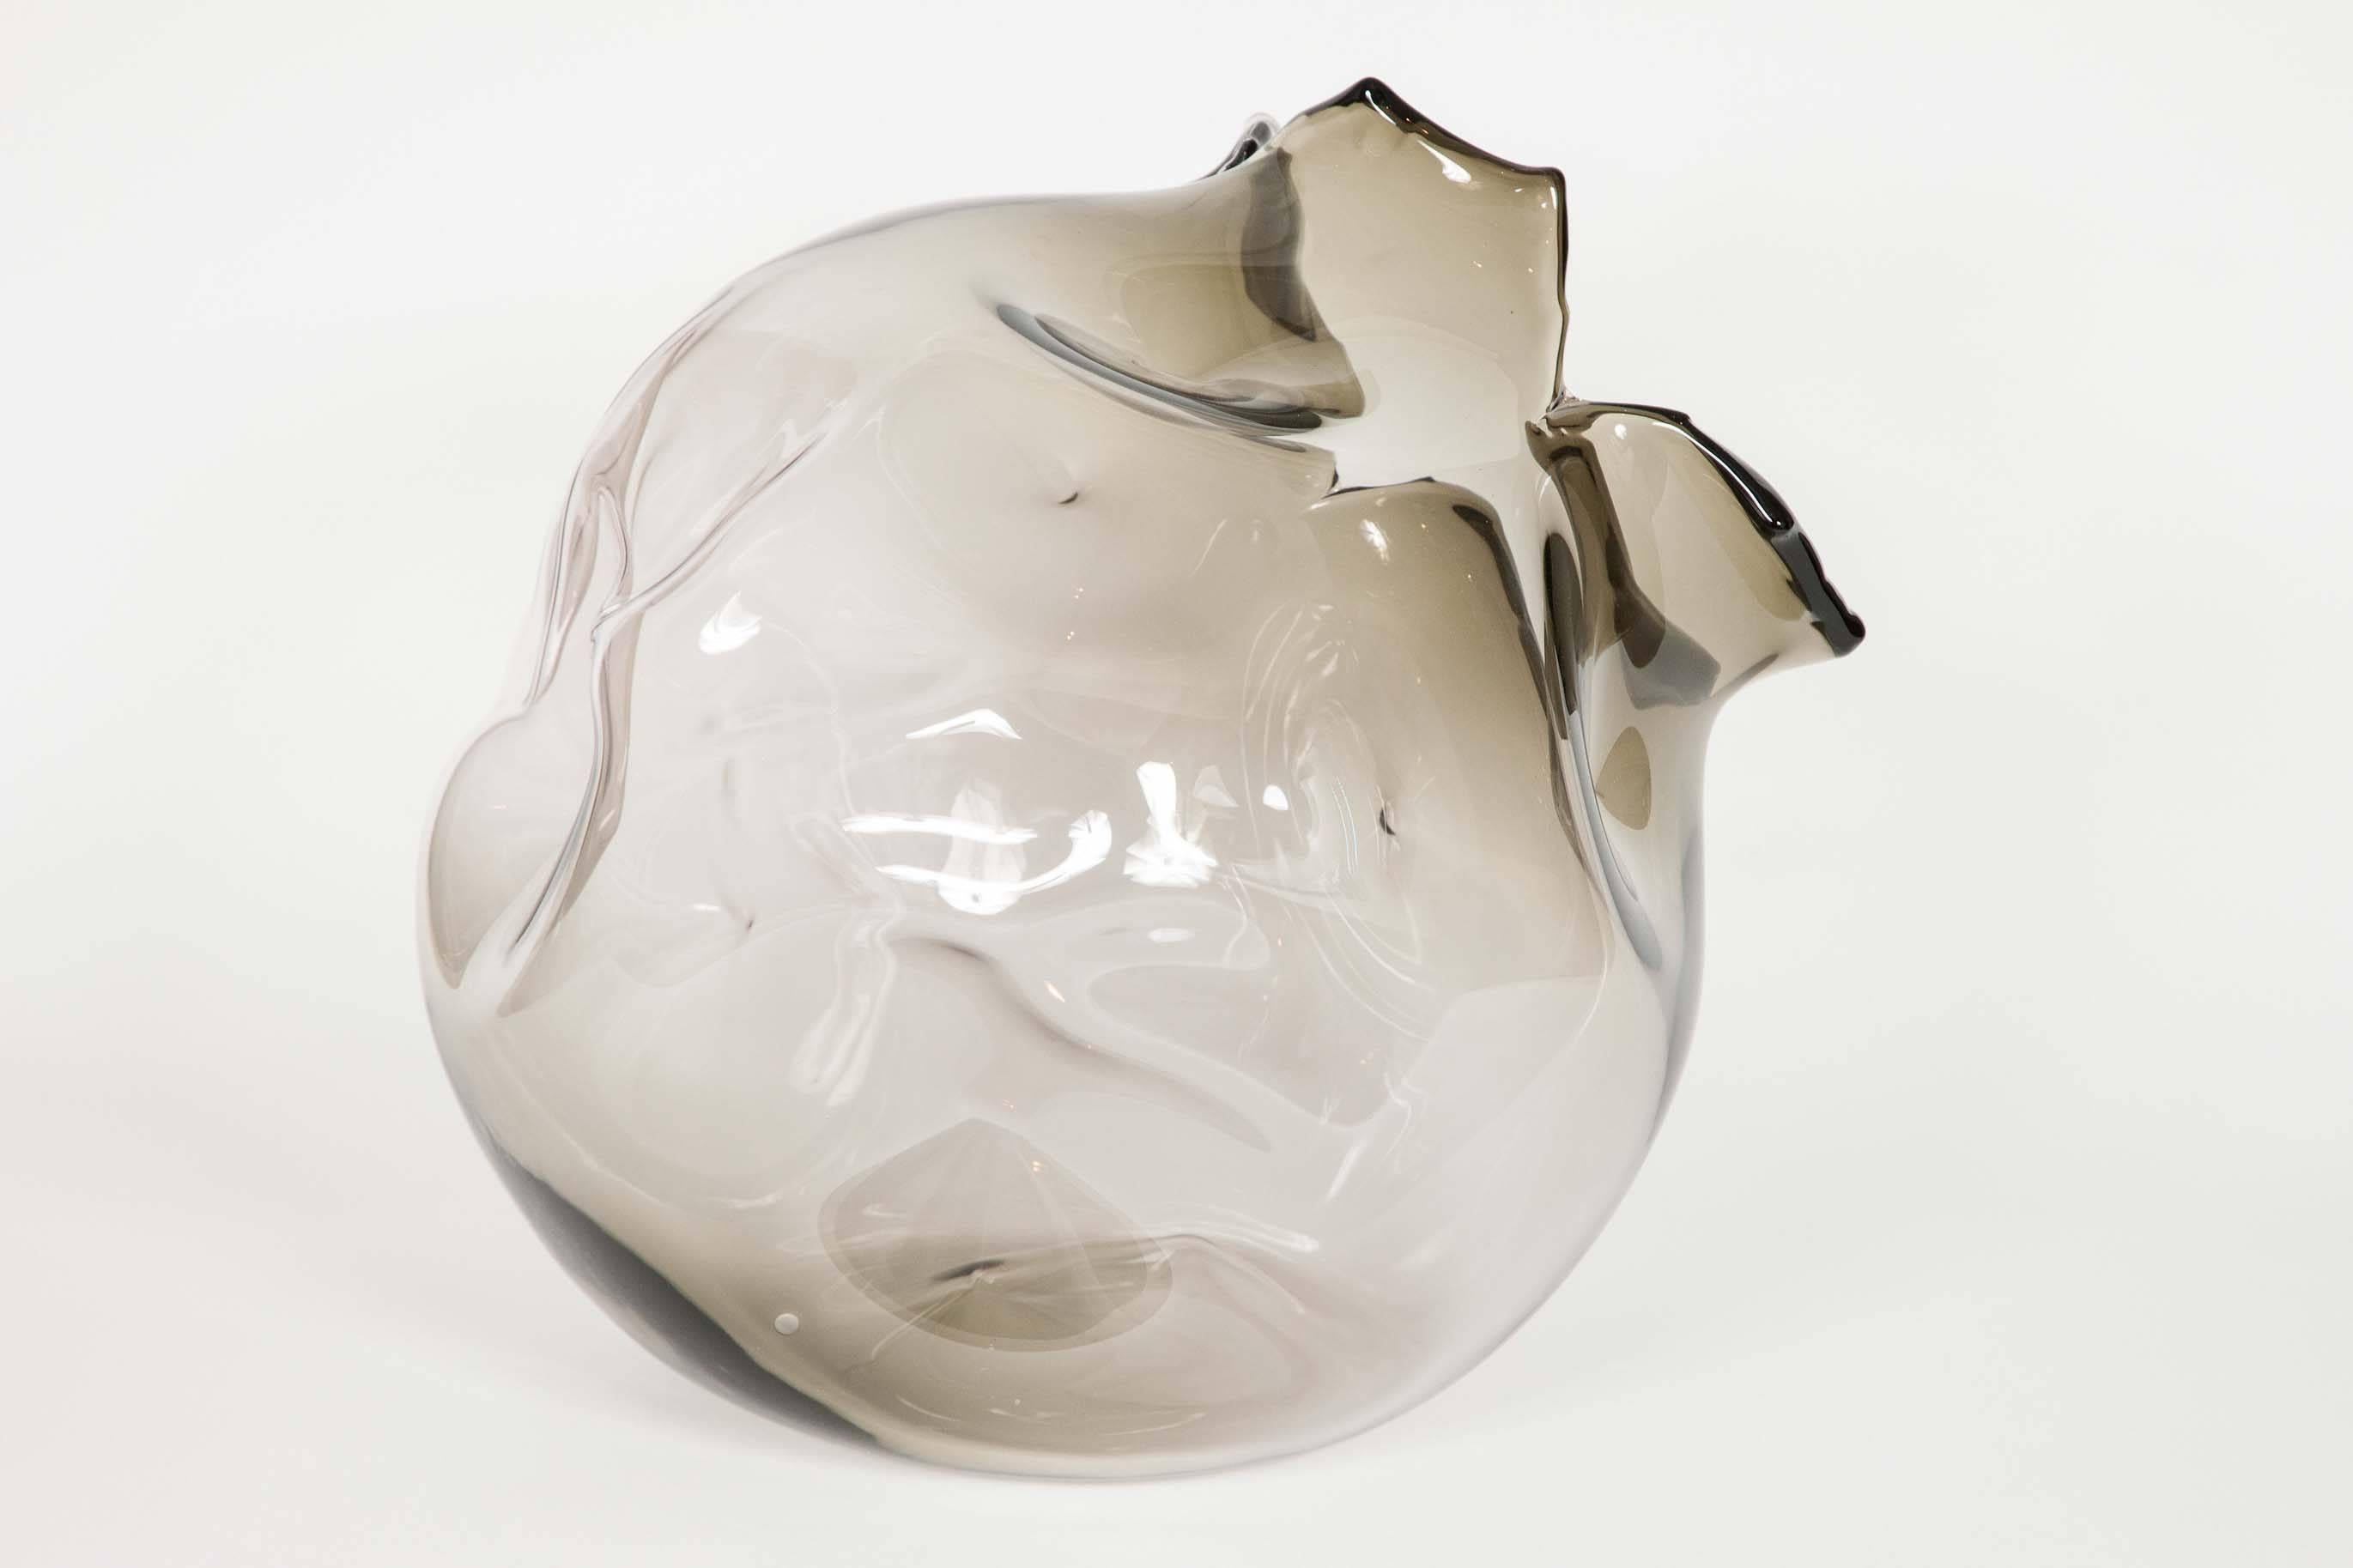 Hand-Crafted Spirit Fruit in Bronze, a Unique Glass Sculpture by Jeremy Maxwell Wintrebert